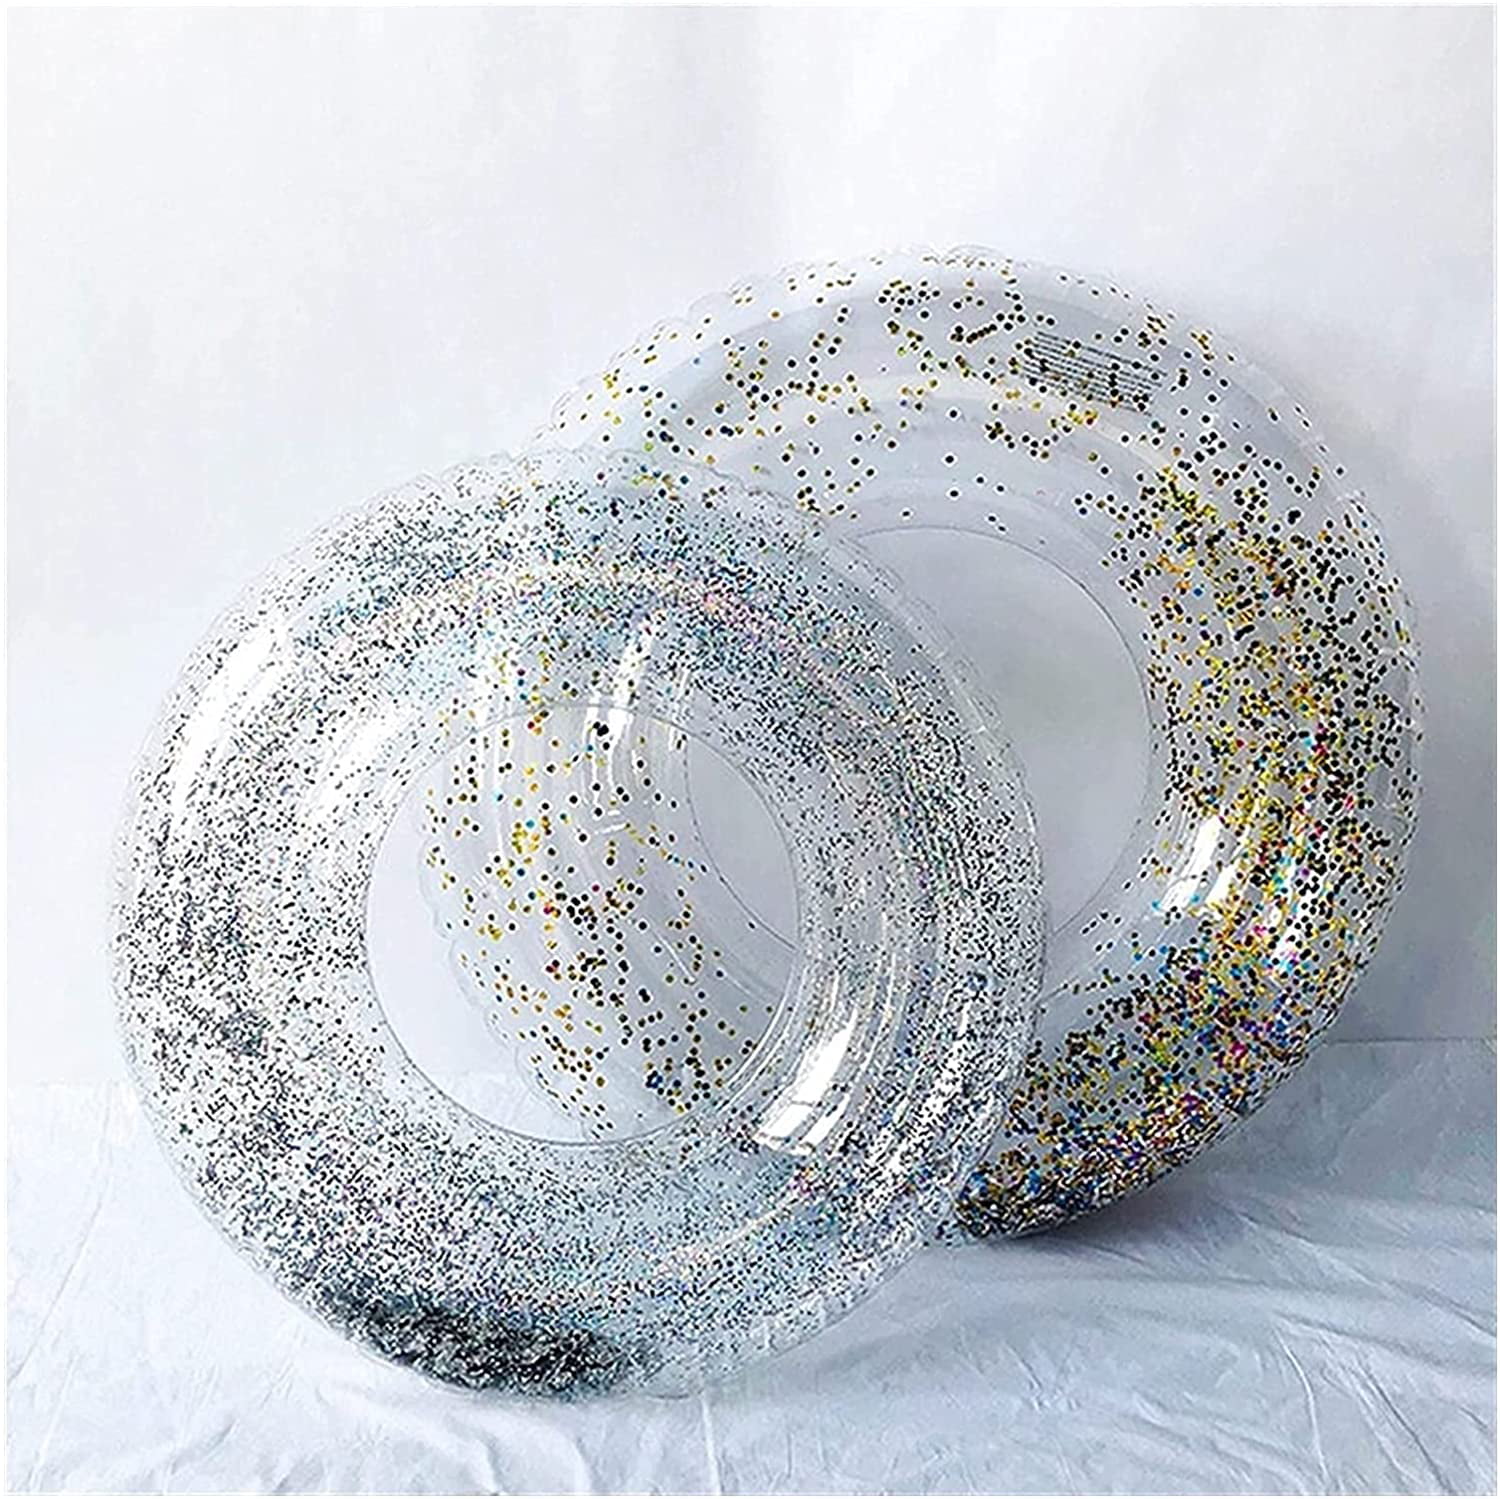 Inflatable Pool Floats Glitter Pool Swim Rings Pool Floatie Ring Water Fun Tubes Summer Beach Swimming Pool Floats Party Supplies for Kids Adults Color : Silver, Size : 80cm